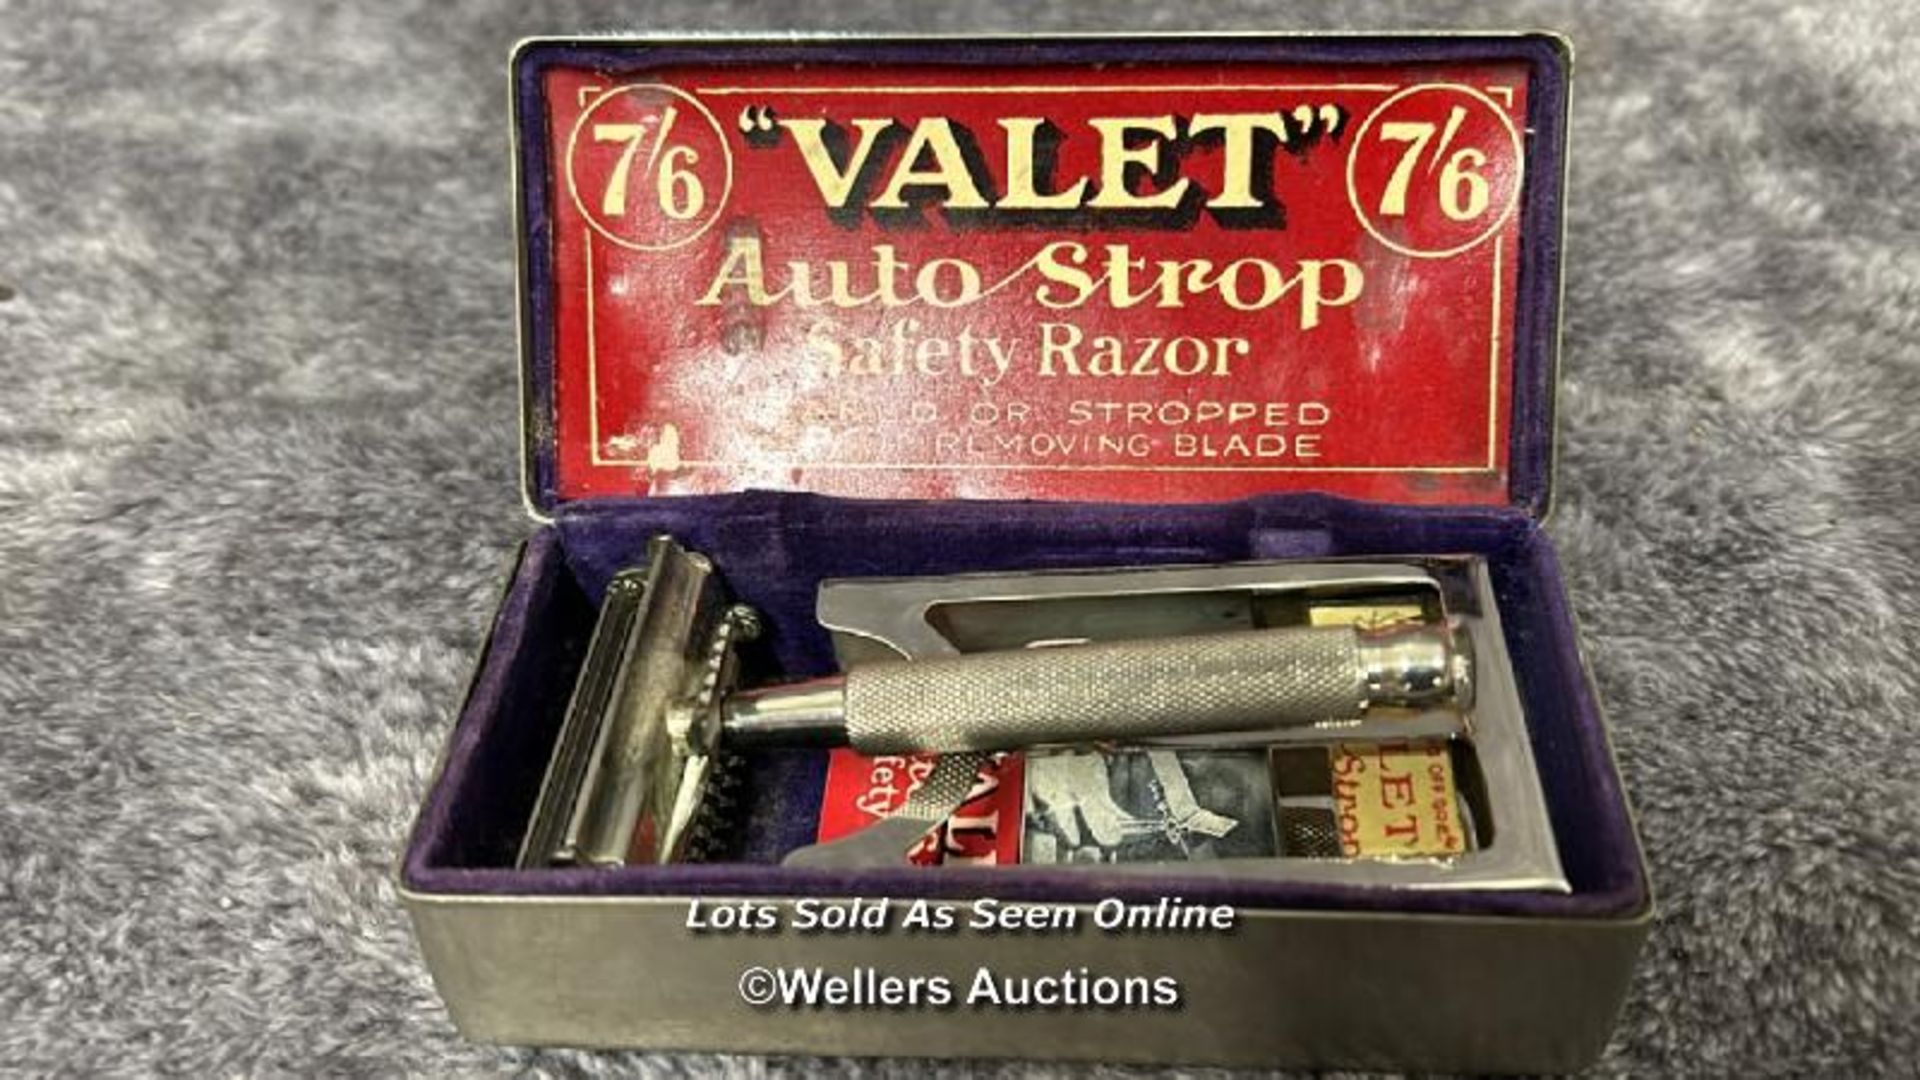 Three vintage razors including Gillette and Auto Strop 'Valet' / AN22 - Image 3 of 4